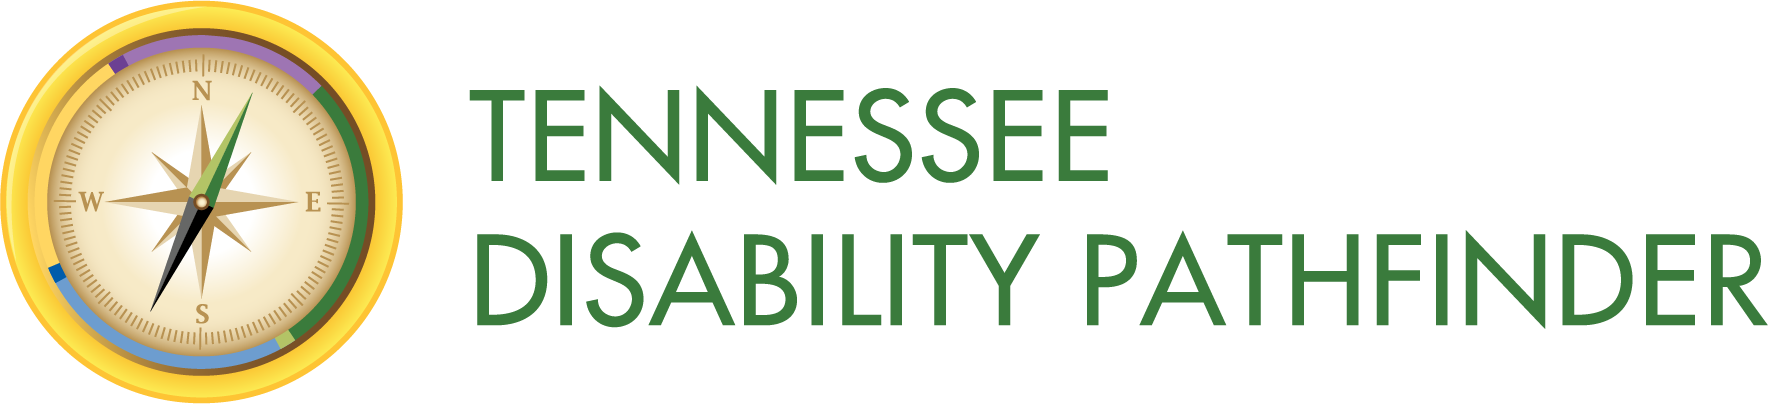 Compass to the left of green text, "TENNESSEE DISABILITY PATHFINDER